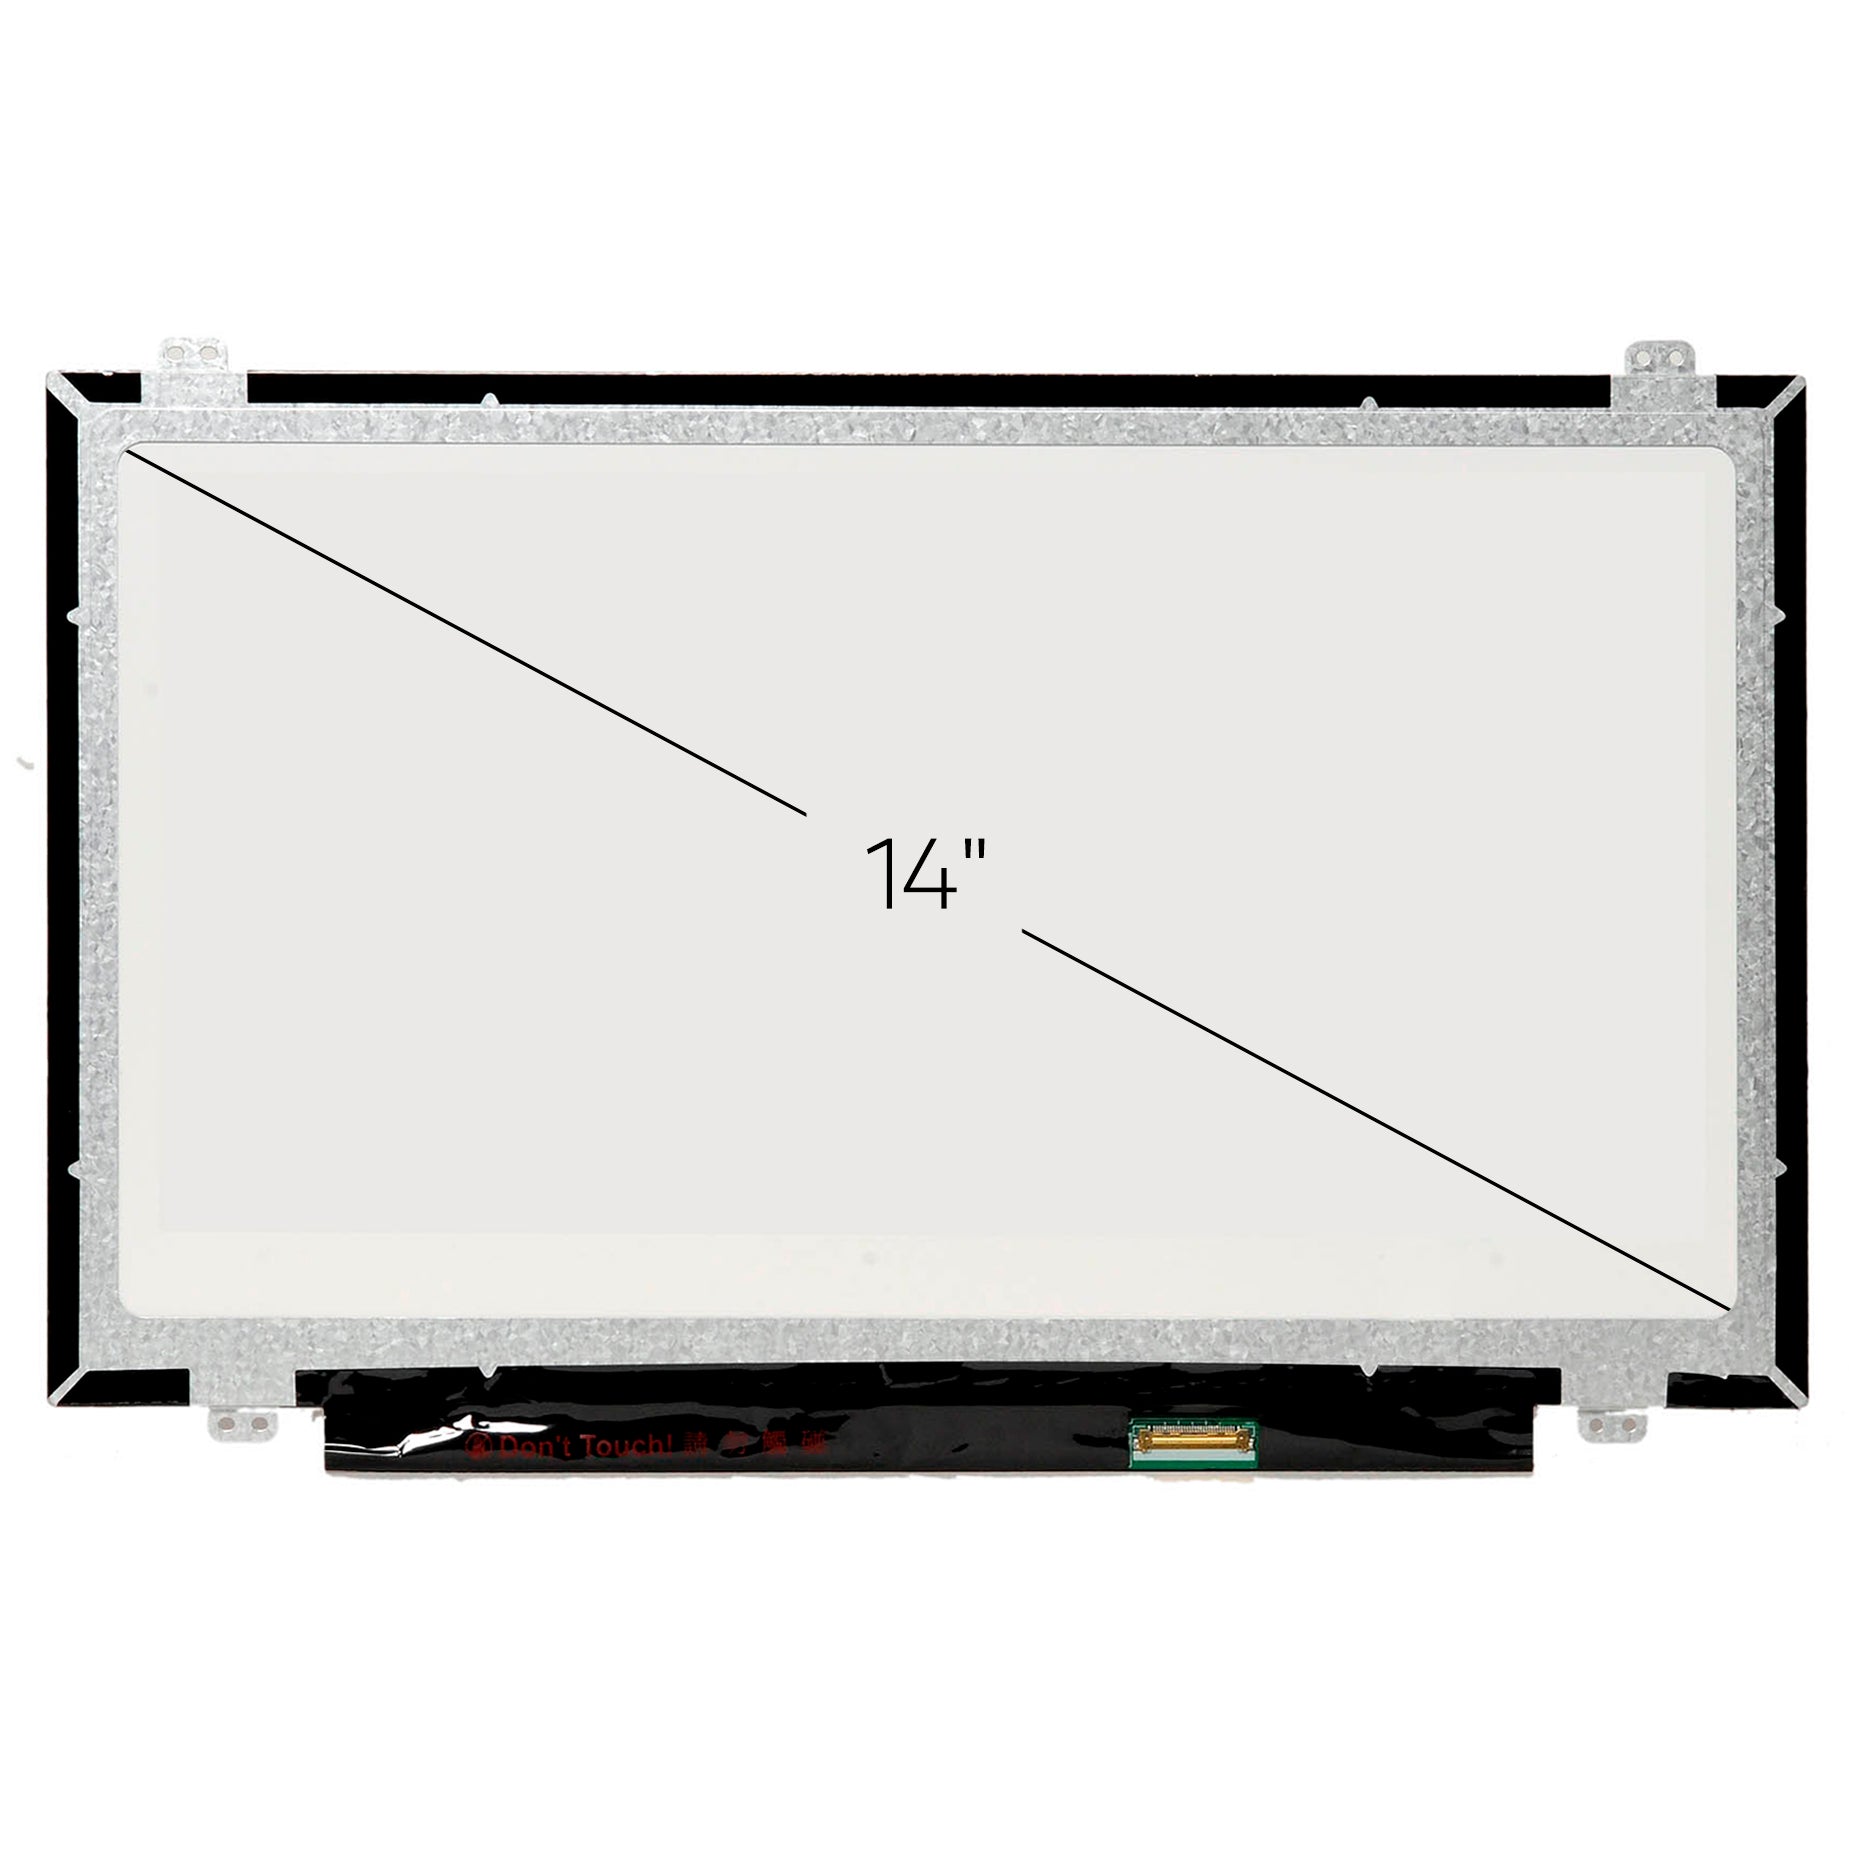 Screen Replacement for ASUS VivoBook E403S HD 1366x768 Glossy LCD LED Display